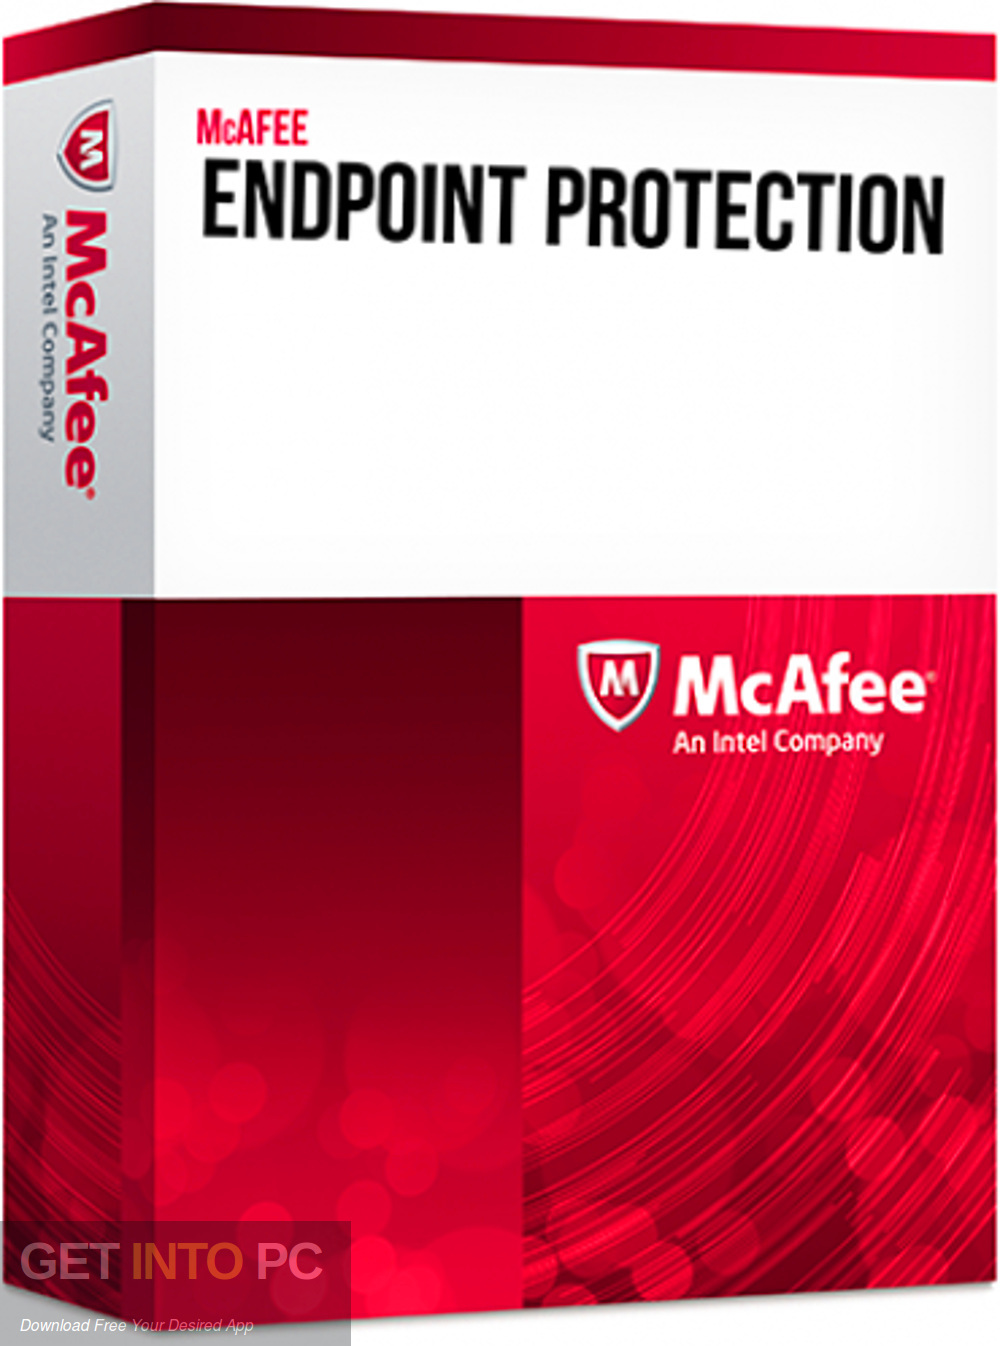 McAfee Endpoint Security 2020 Free Download GetintoPC.com